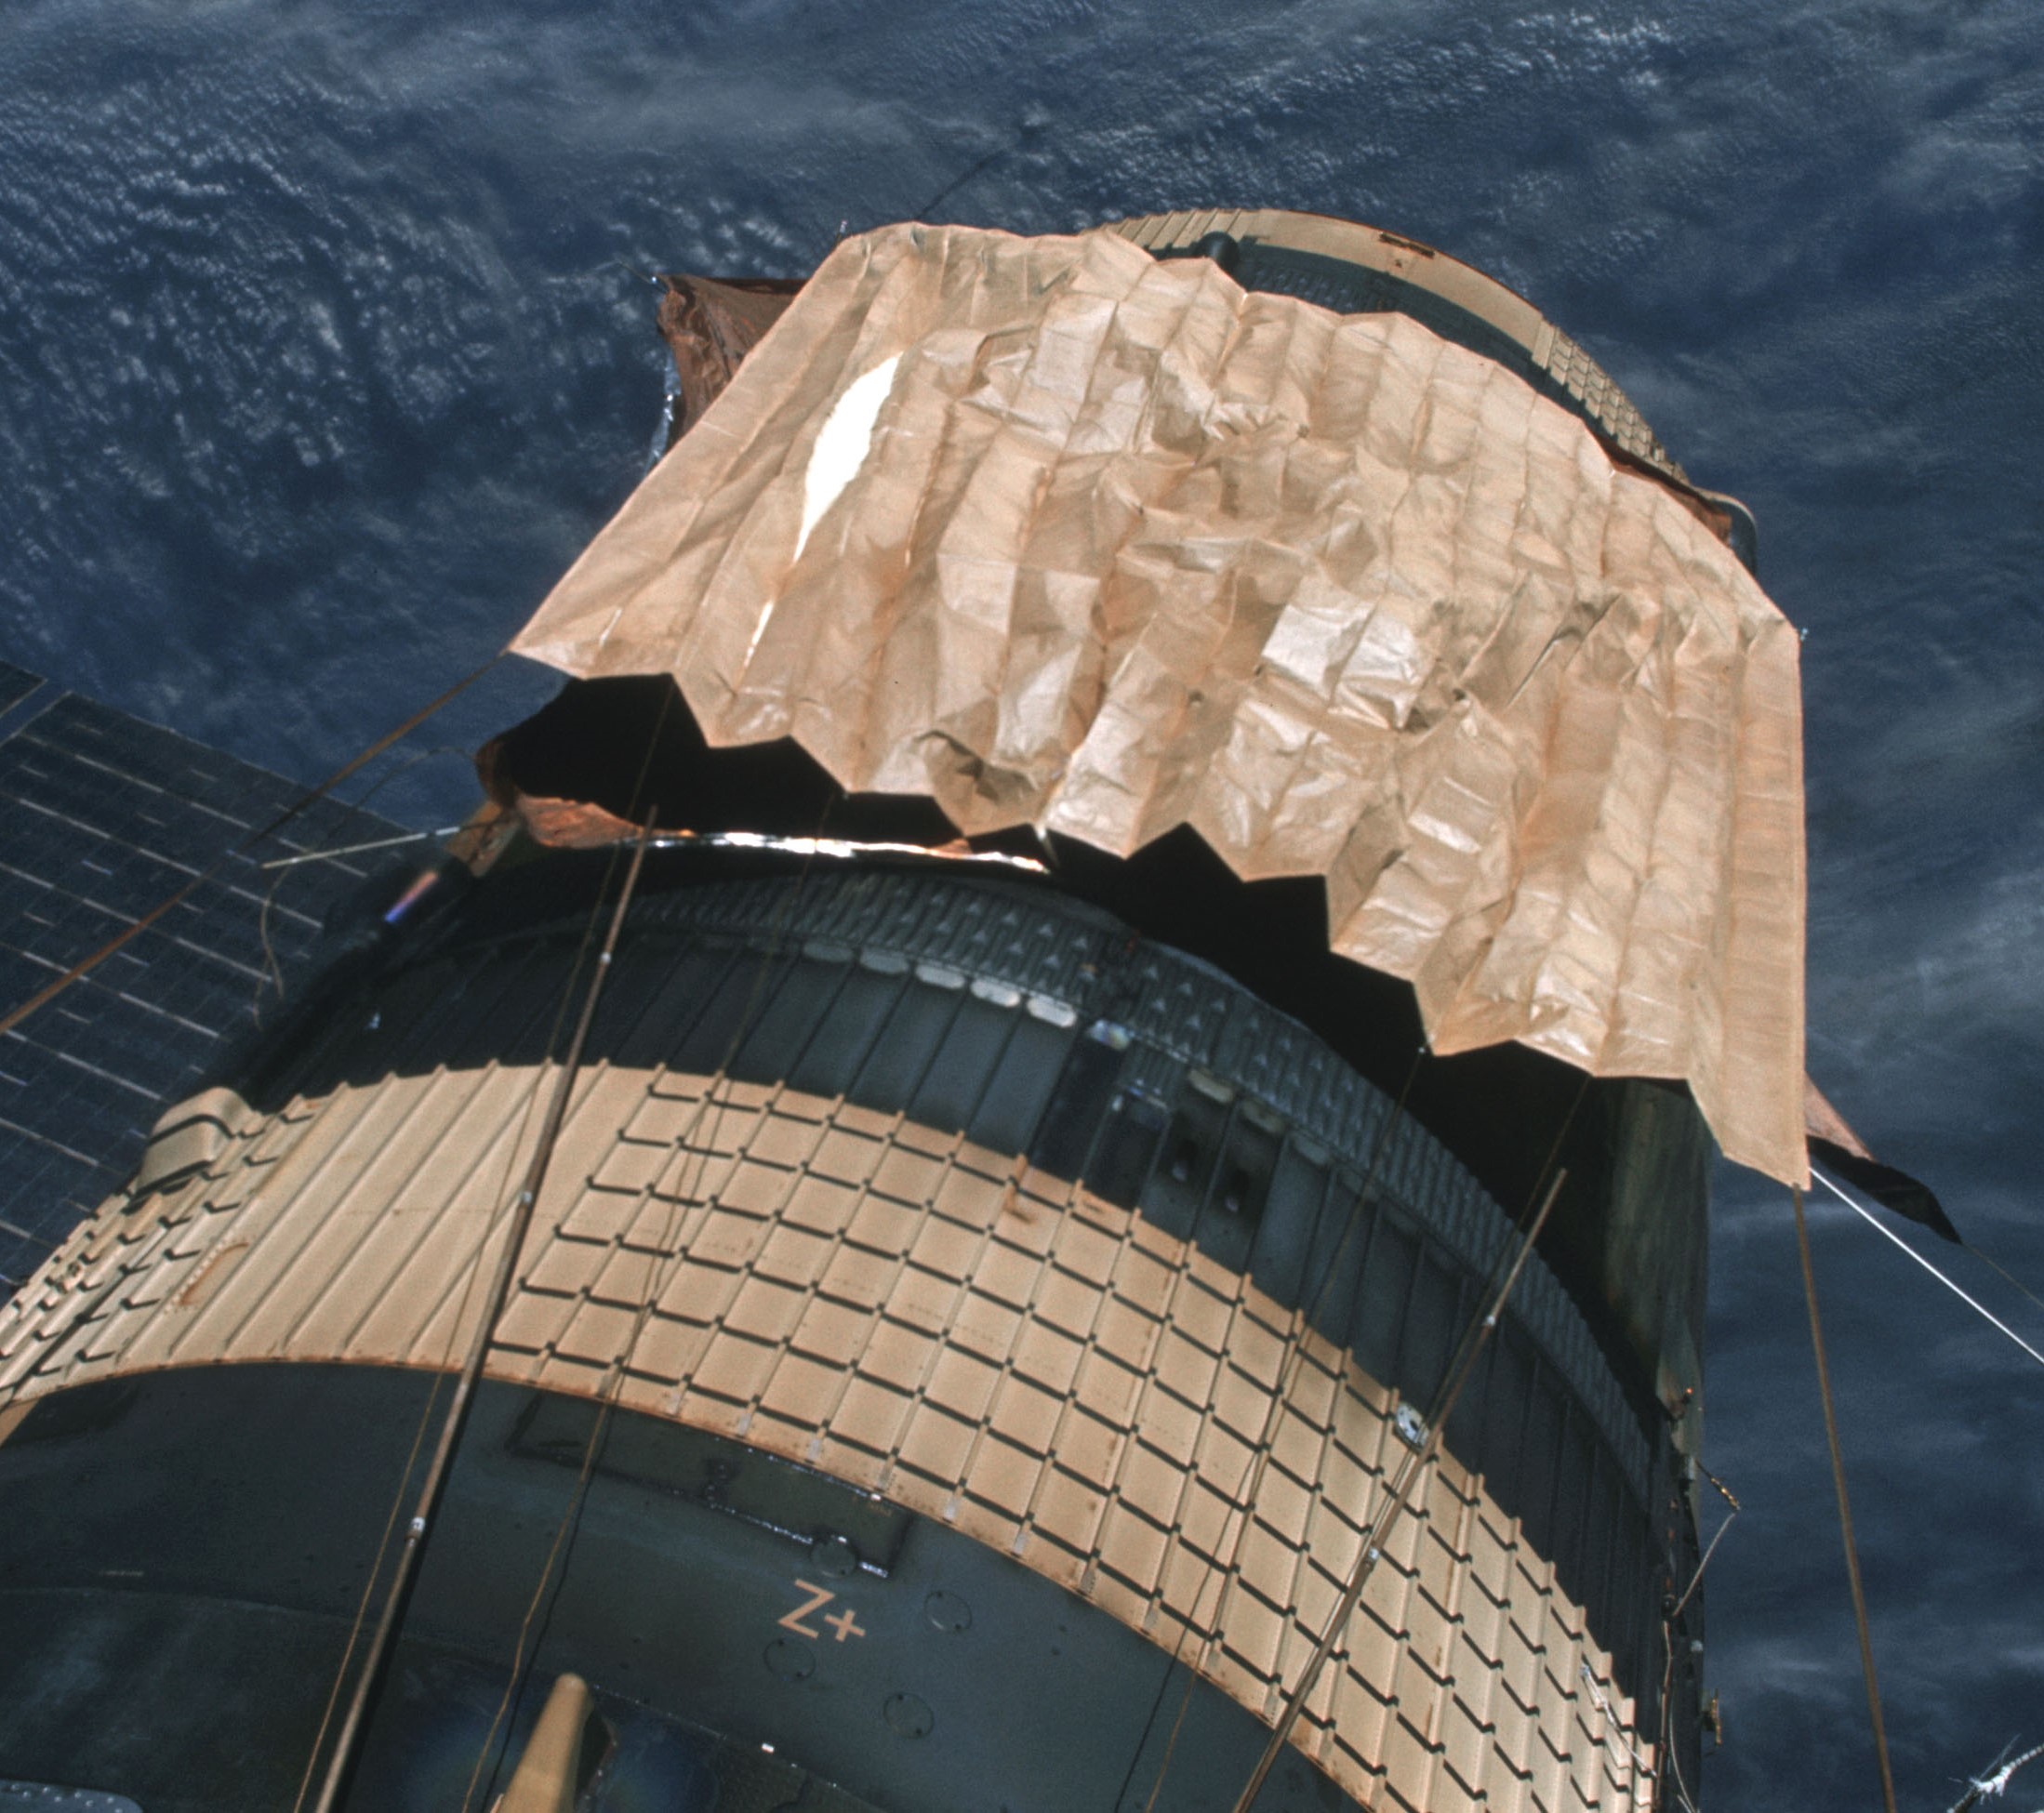 The second sunshield deployed by the Skylab 3 crew showing evidence of discoloration